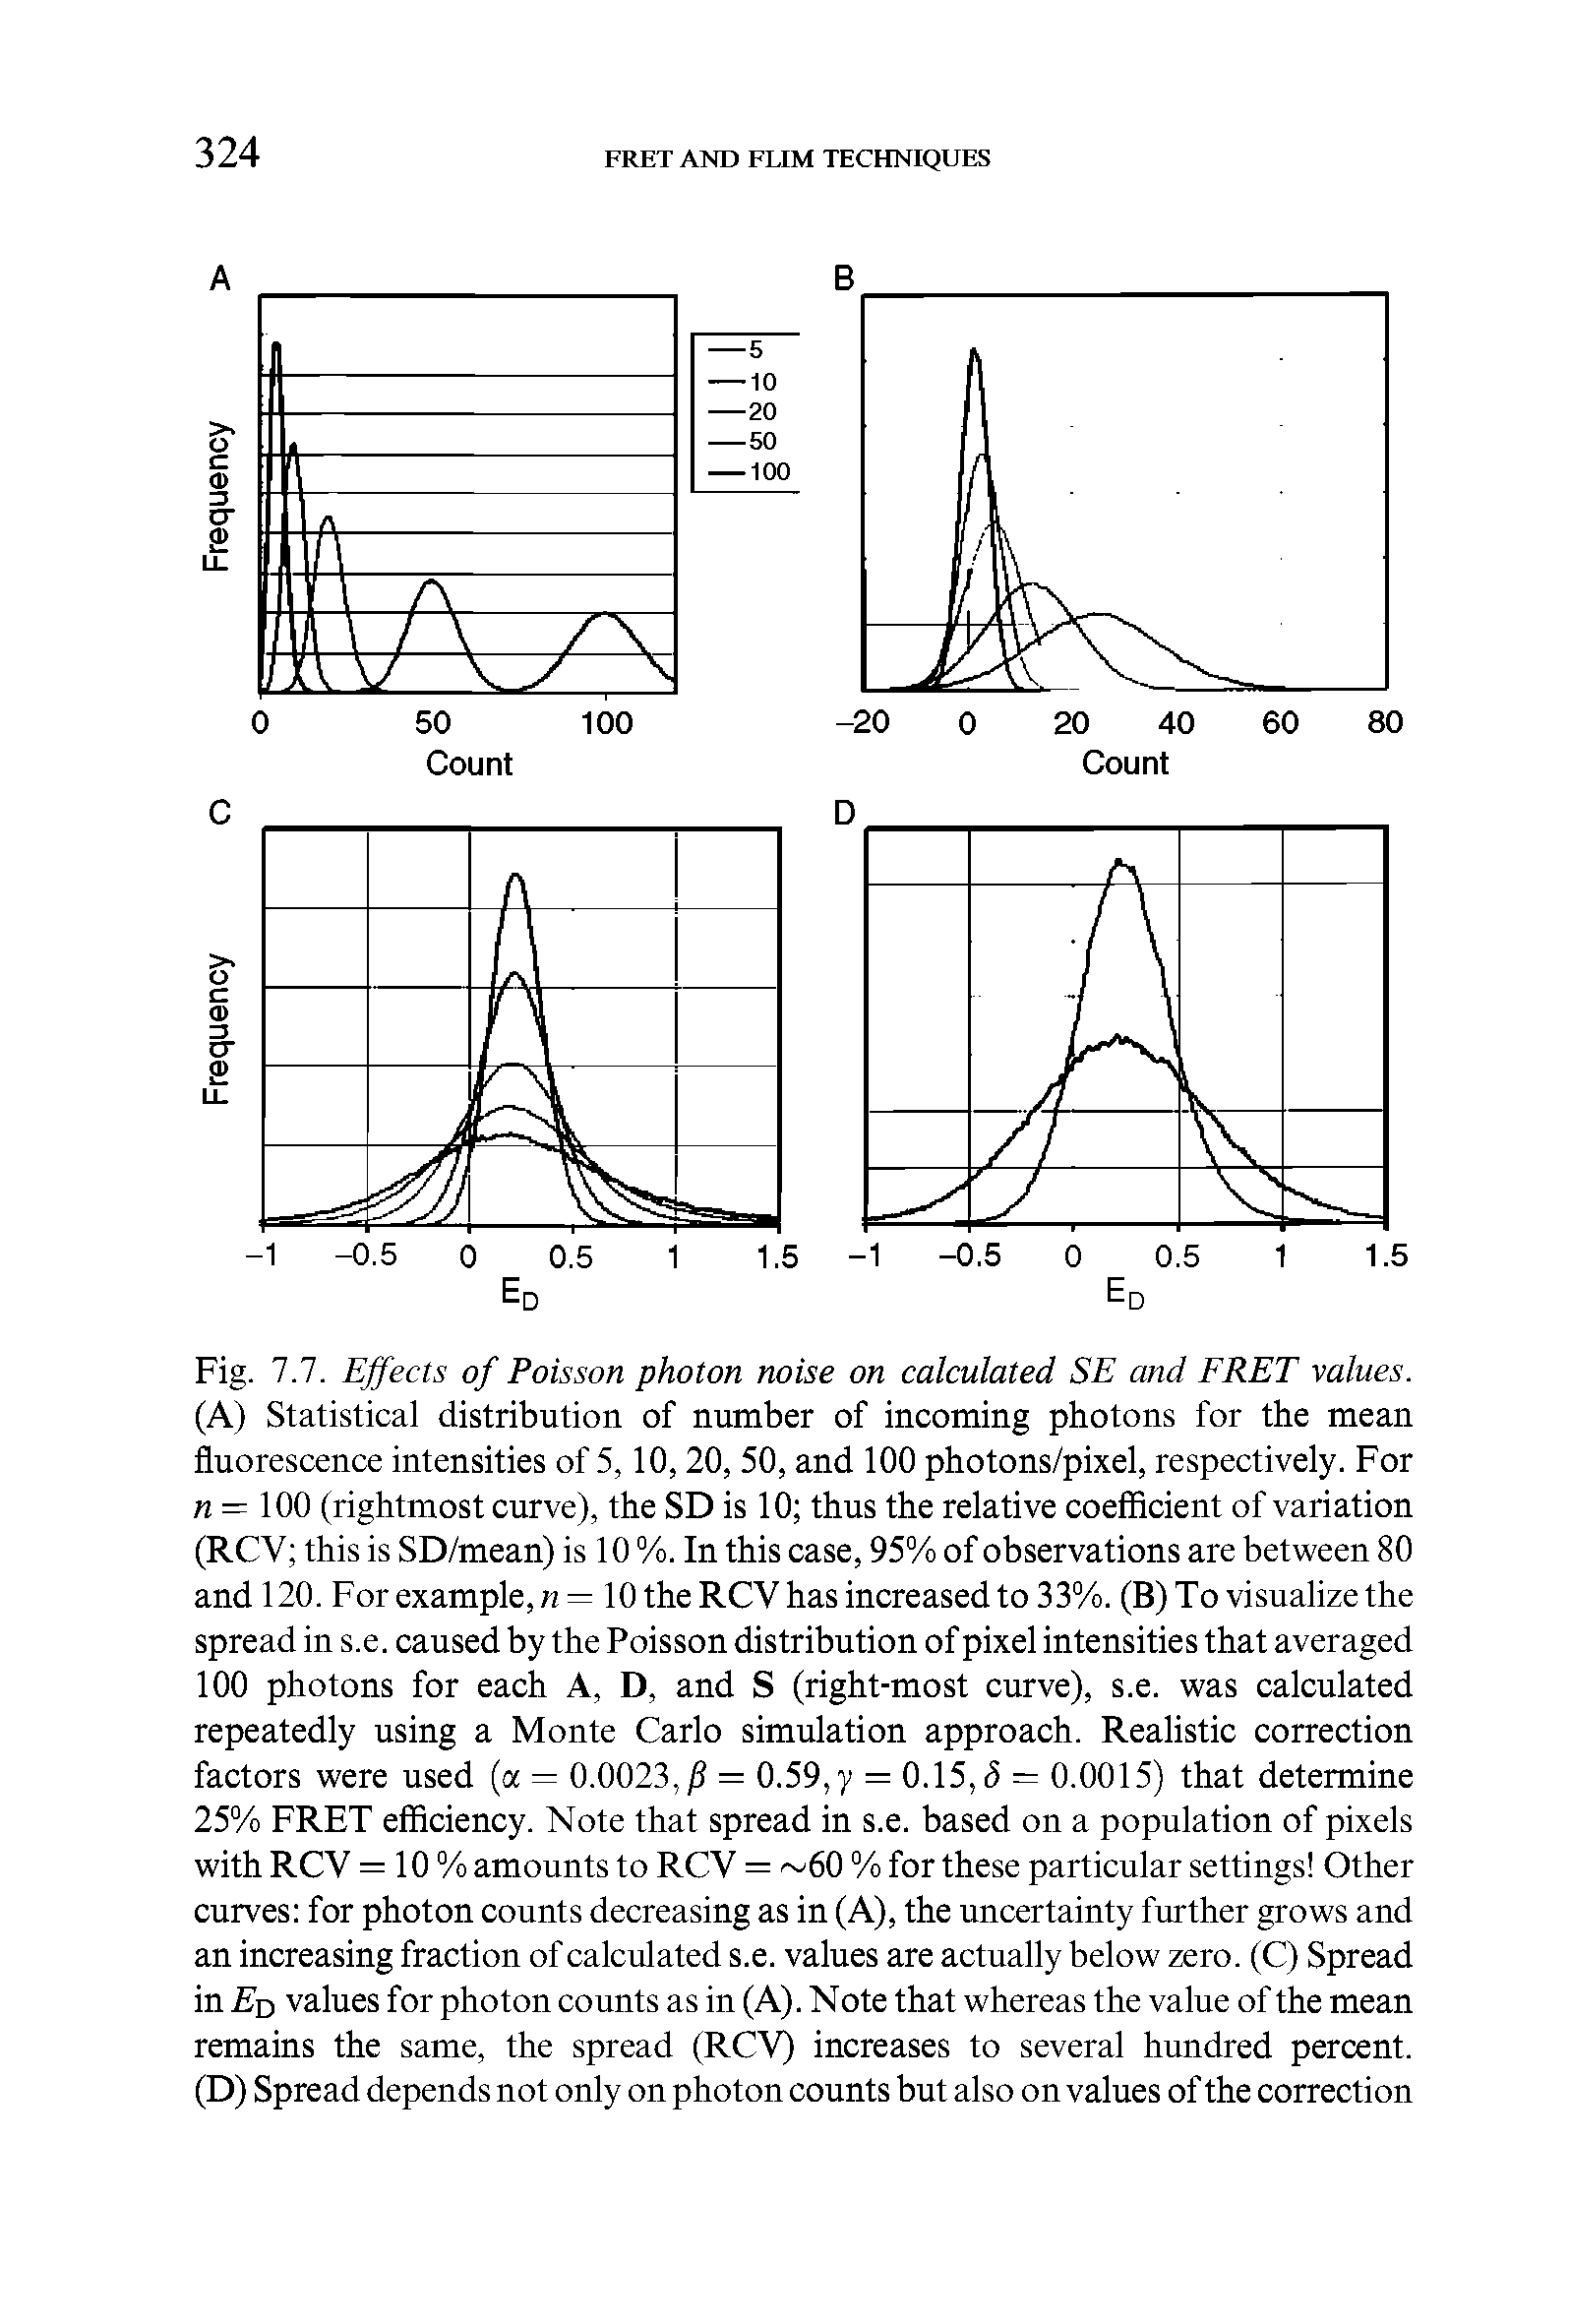 Fig. 7.7. Effects of Poisson photon noise on calculated SE and FRET values. (A) Statistical distribution of number of incoming photons for the mean fluorescence intensities of 5,10, 20, 50, and 100 photons/pixel, respectively. For n = 100 (rightmost curve), the SD is 10 thus the relative coefficient of variation (RCV this is SD/mean) is 10 %. In this case, 95% of observations are between 80 and 120. For example, n — 10 the RCY has increased to 33%. (B) To visualize the spread in s.e. caused by the Poisson distribution of pixel intensities that averaged 100 photons for each A, D, and S (right-most curve), s.e. was calculated repeatedly using a Monte Carlo simulation approach. Realistic correction factors were used (a = 0.0023,/ = 0.59, y = 0.15, <5 = 0.0015) that determine 25% FRET efficiency. Note that spread in s.e. based on a population of pixels with RCY = 10 % amounts to RCV = 60 % for these particular settings Other curves for photon counts decreasing as in (A), the uncertainty further grows and an increasing fraction of calculated s.e. values are actually below zero. (C) Spread in Ed values for photon counts as in (A). Note that whereas the value of the mean remains the same, the spread (RCV) increases to several hundred percent. (D) Spread depends not only on photon counts but also on values of the correction...